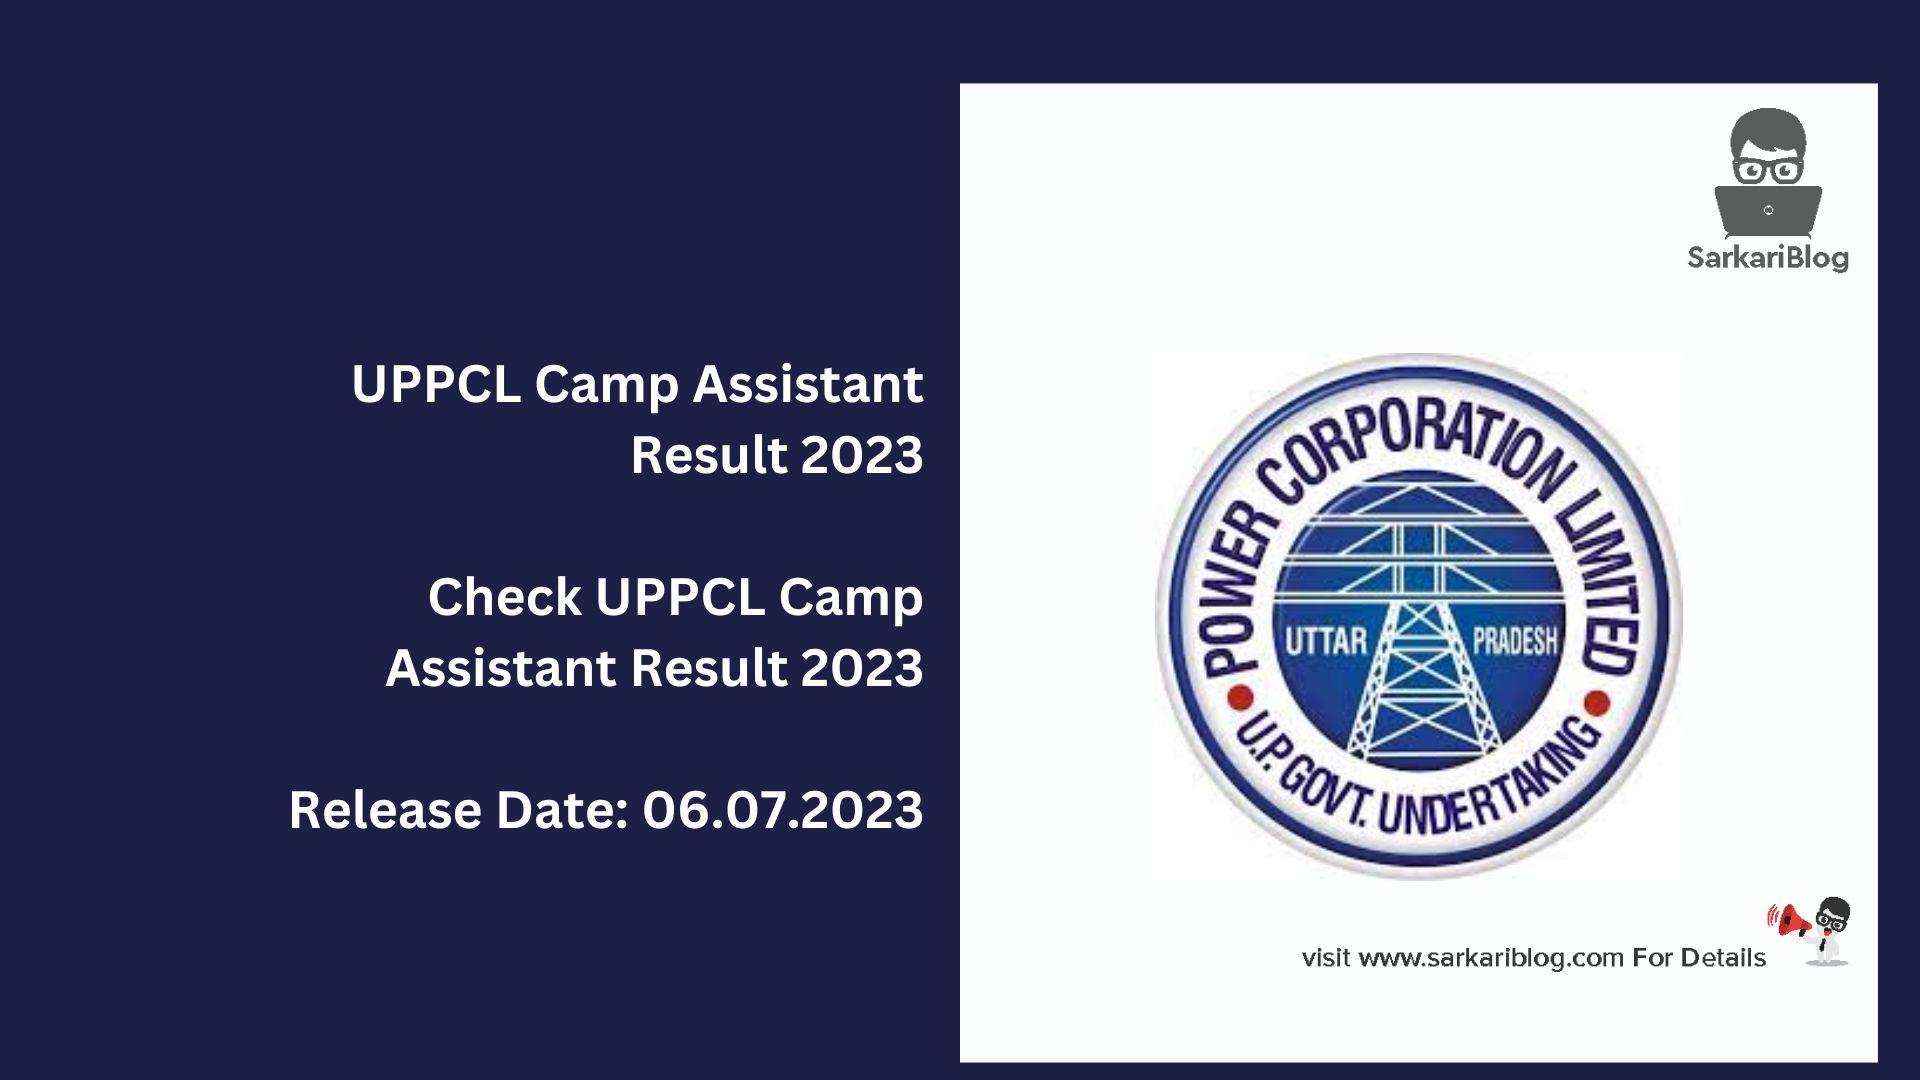 UPPCL Camp Assistant Result 2023